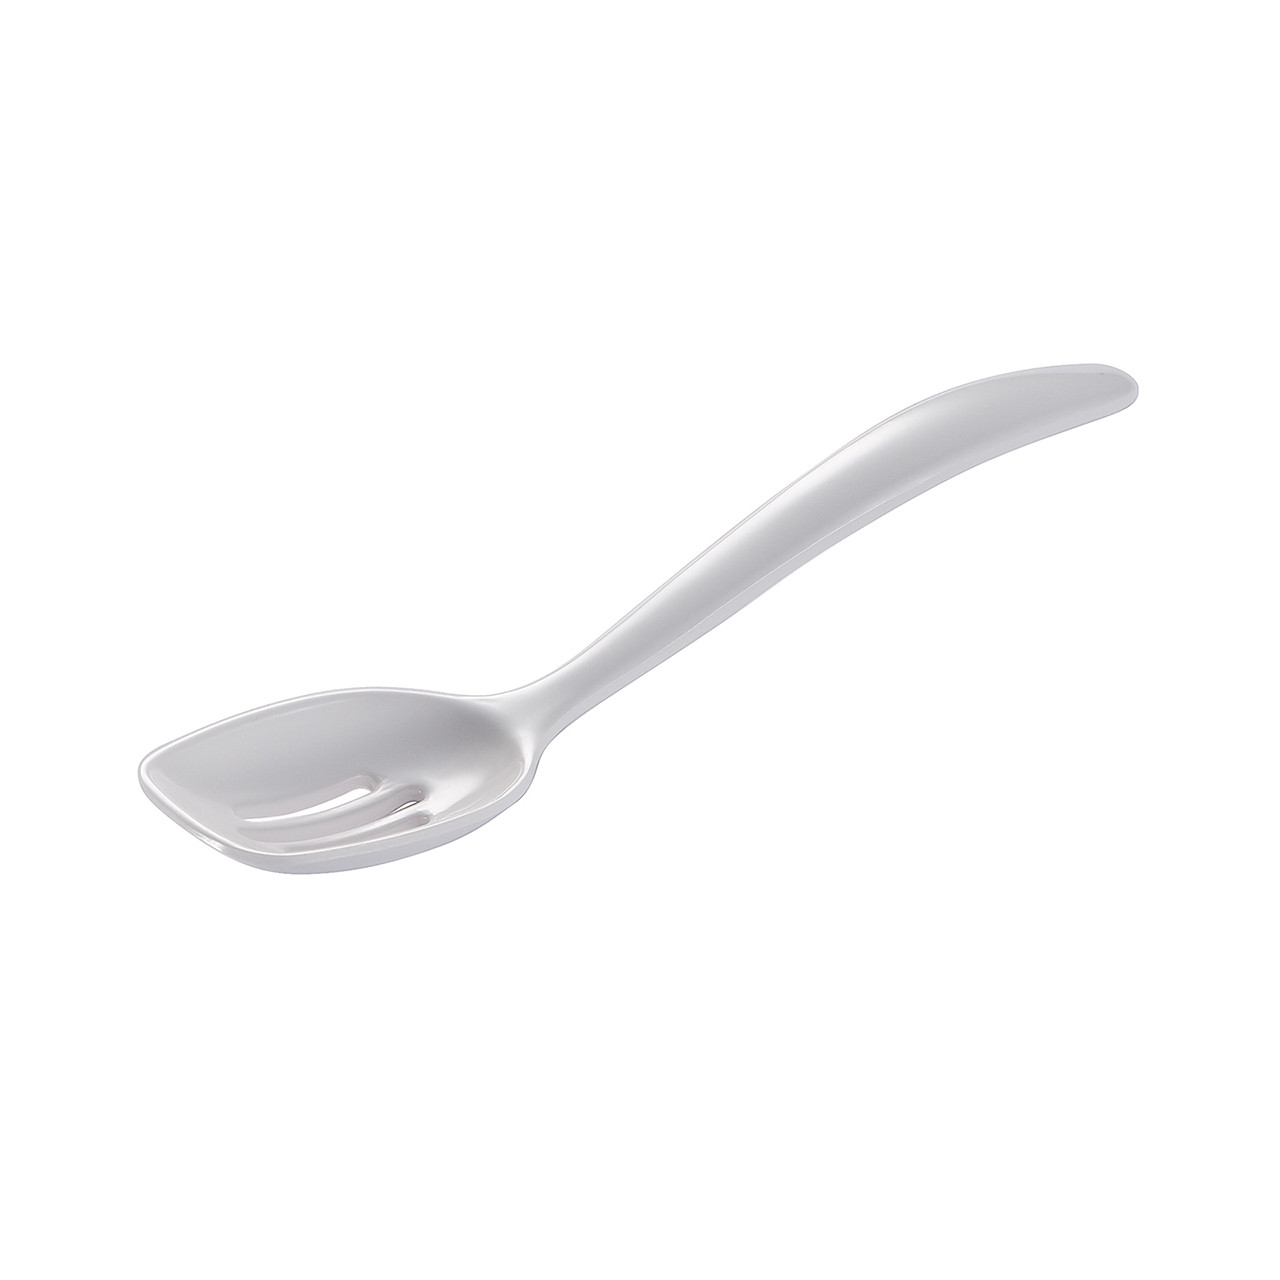 Pikanty - Small Slotted Spoons Set of 4